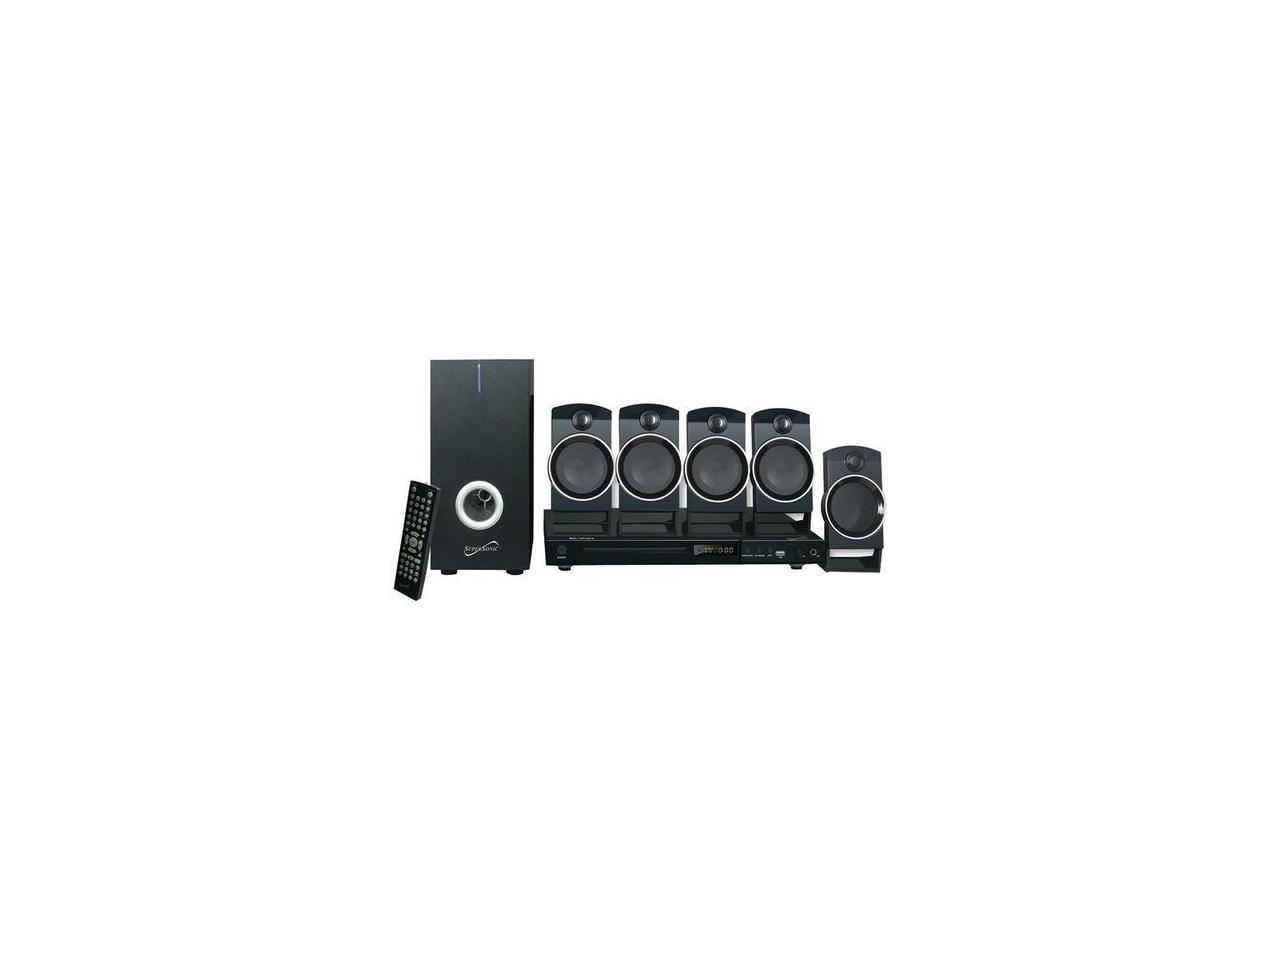 SUPERSONIC SC-37HT 5.1 Channel Dvd Home Theater System With USB Input & Karaoke Function - image 2 of 13